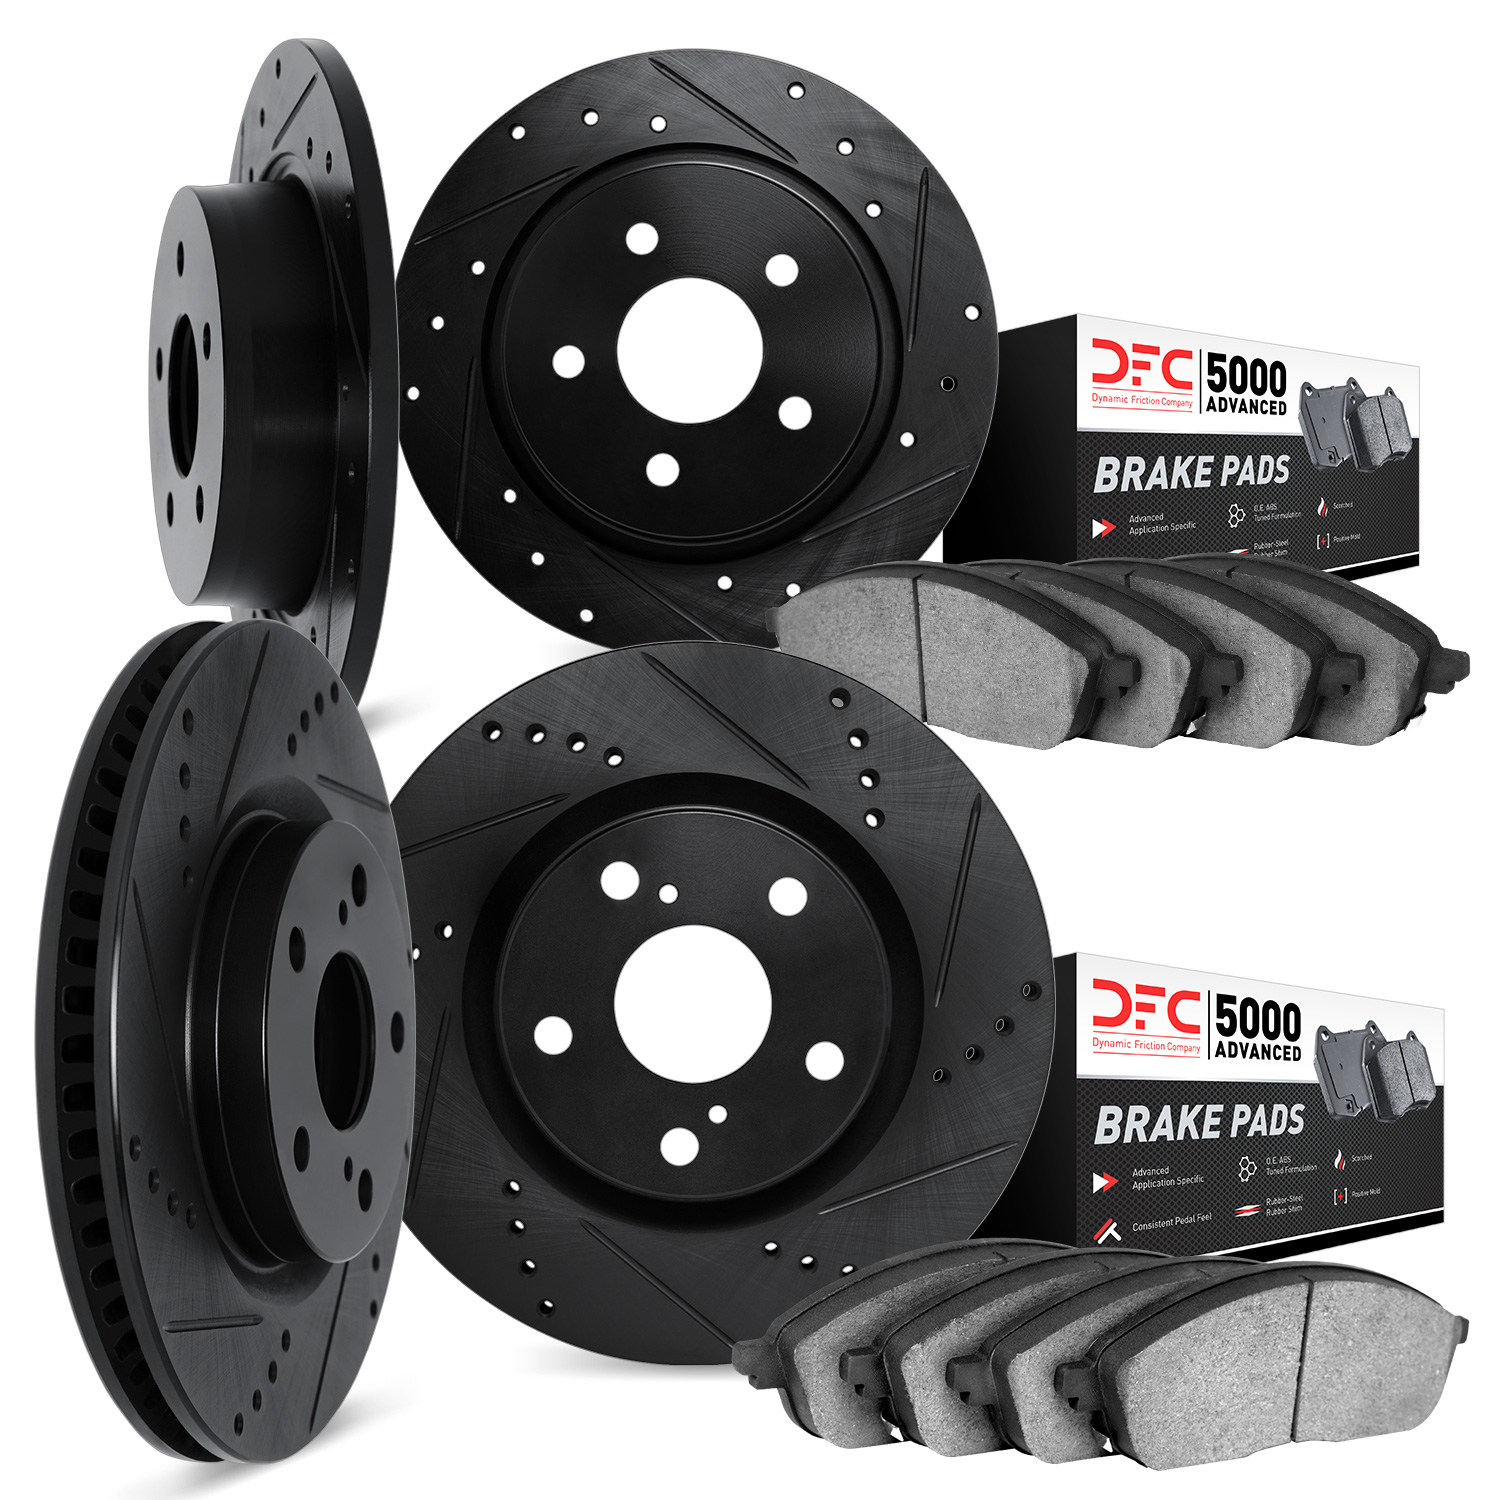 8504-76135 Drilled/Slotted Brake Rotors w/5000 Advanced Brake Pads Kit [Black], 2000-2004 Lexus/Toyota/Scion, Position: Front an